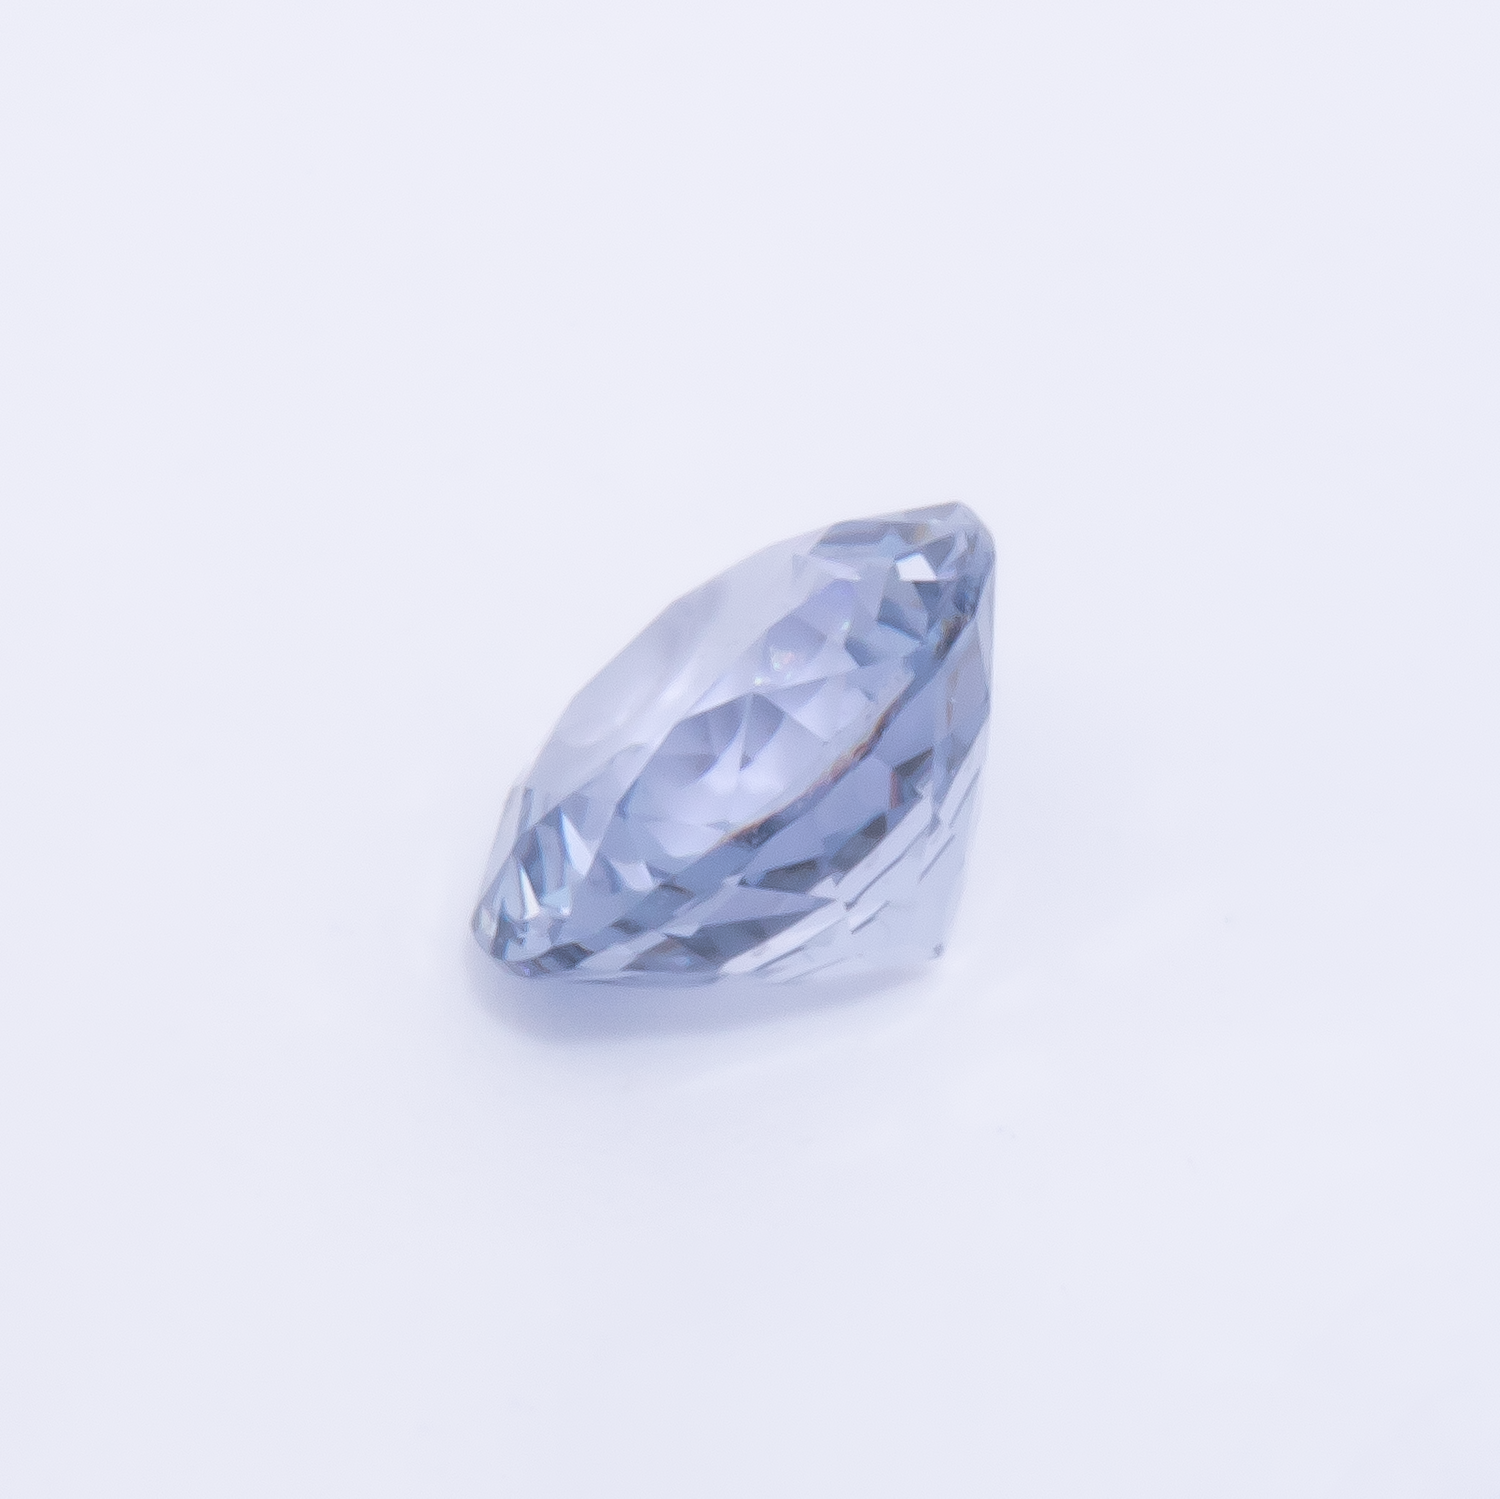 Spinell - lila, rund, 4.5x4.5 mm, 0.42 cts, Nr. SP90063